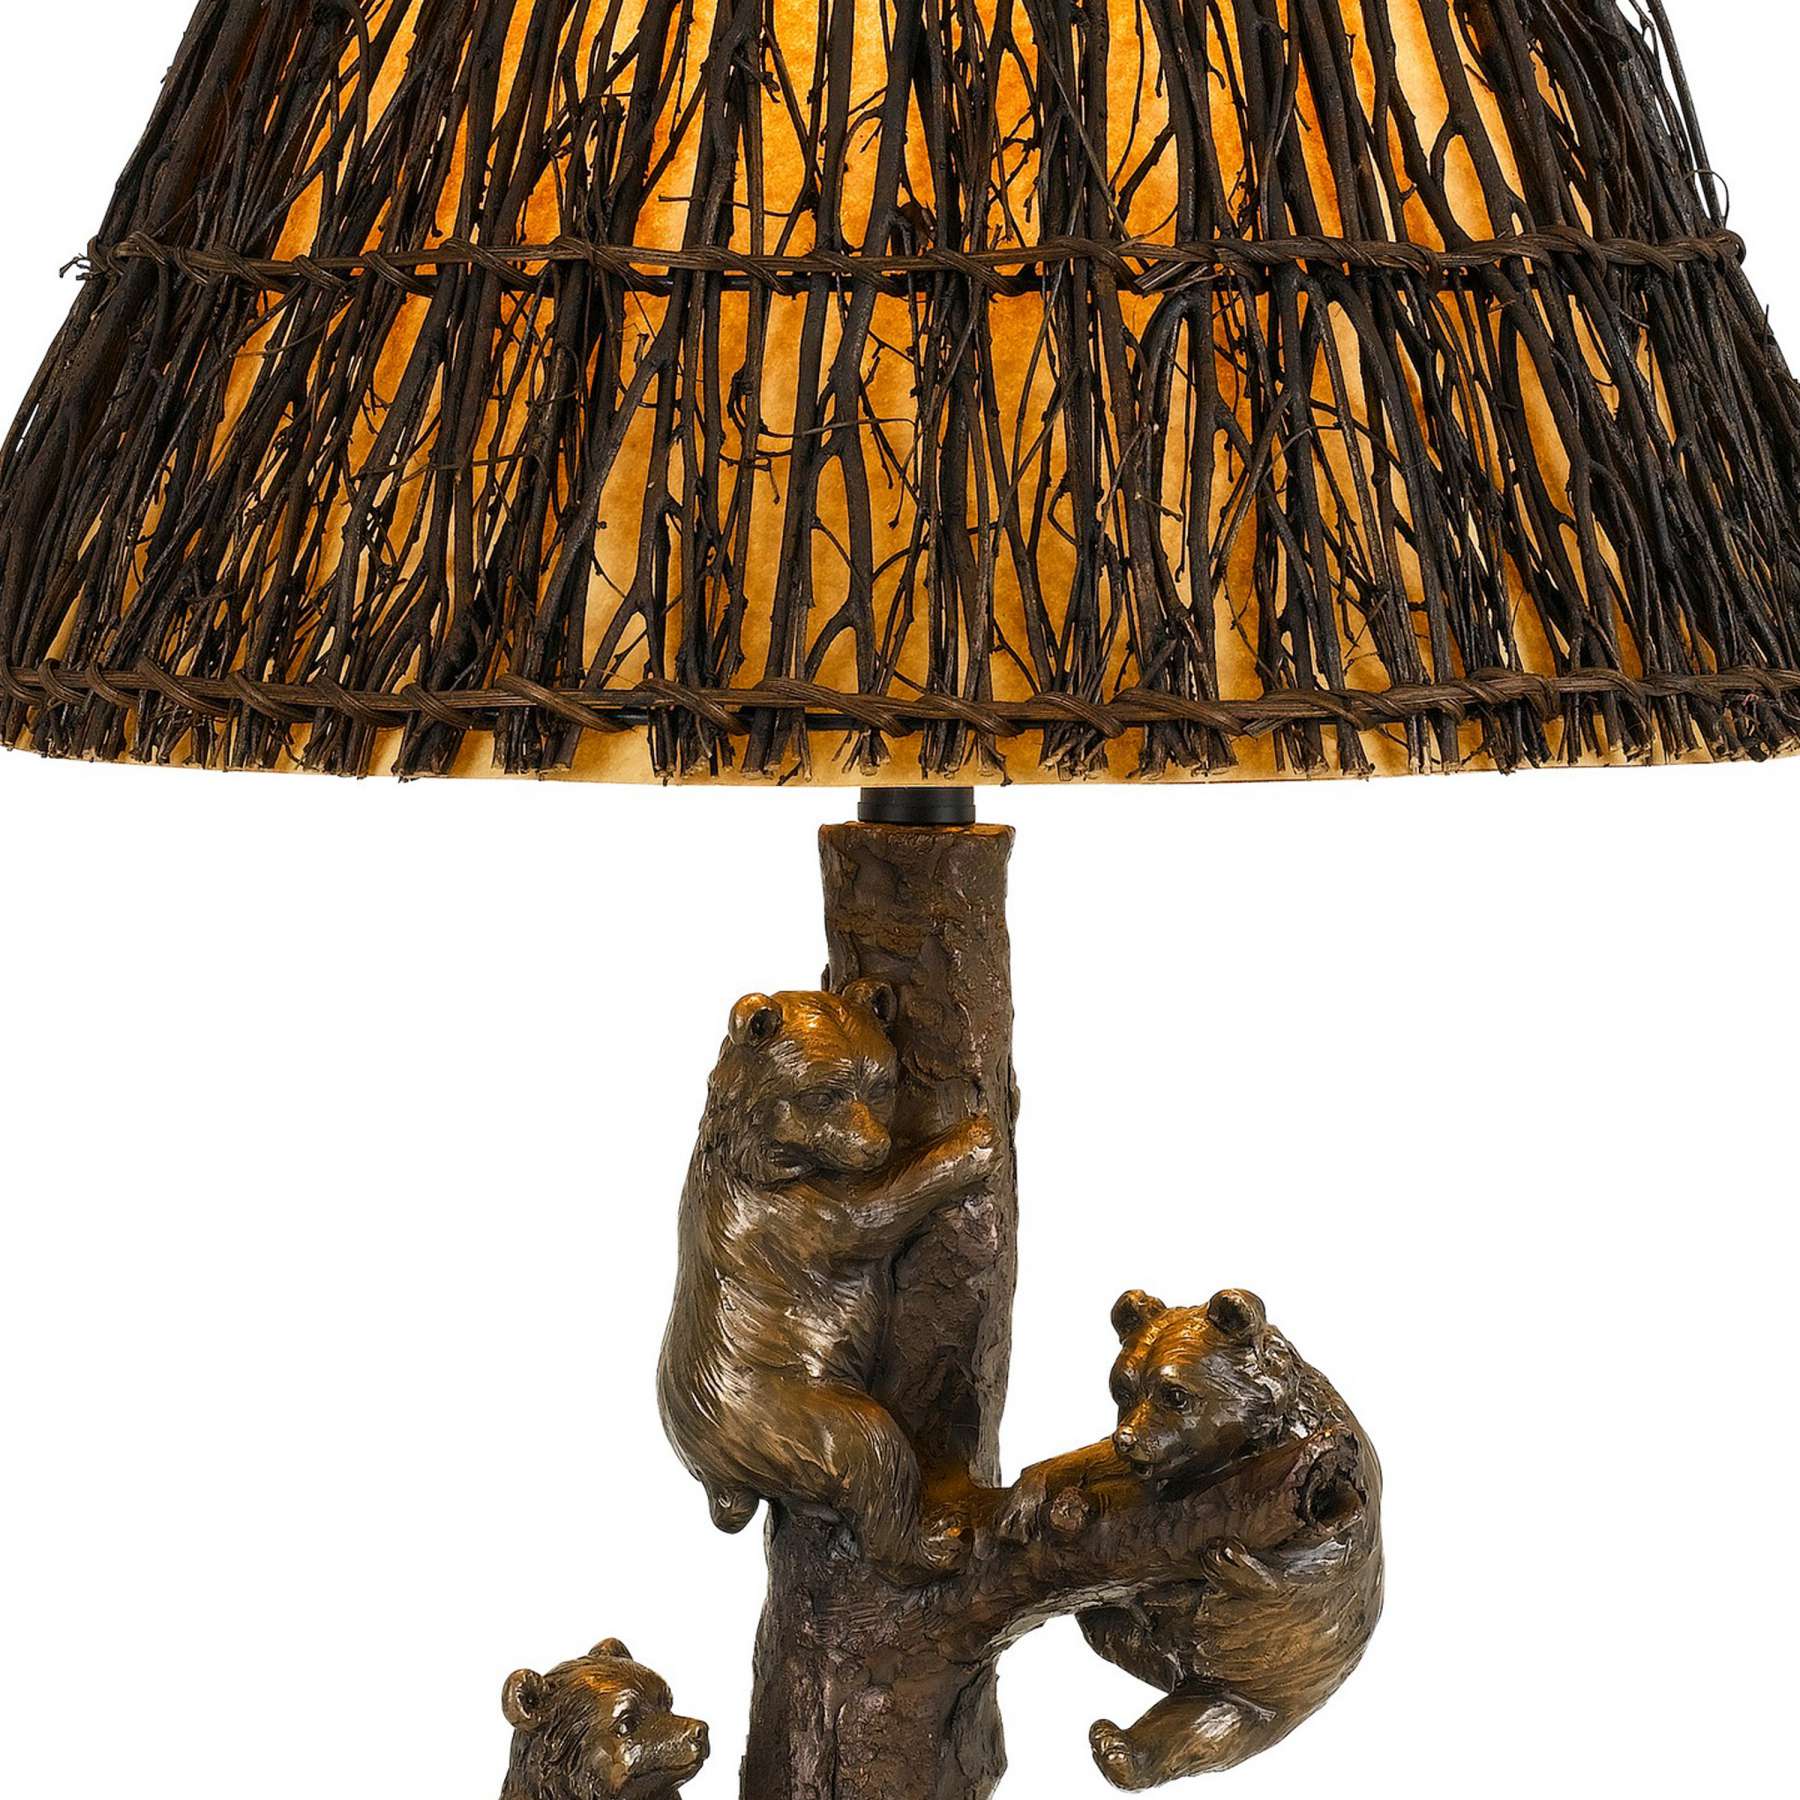 150 Watt Resin Body Table Lamp With Bear Design And Twig Shade, Bronze By Benzara